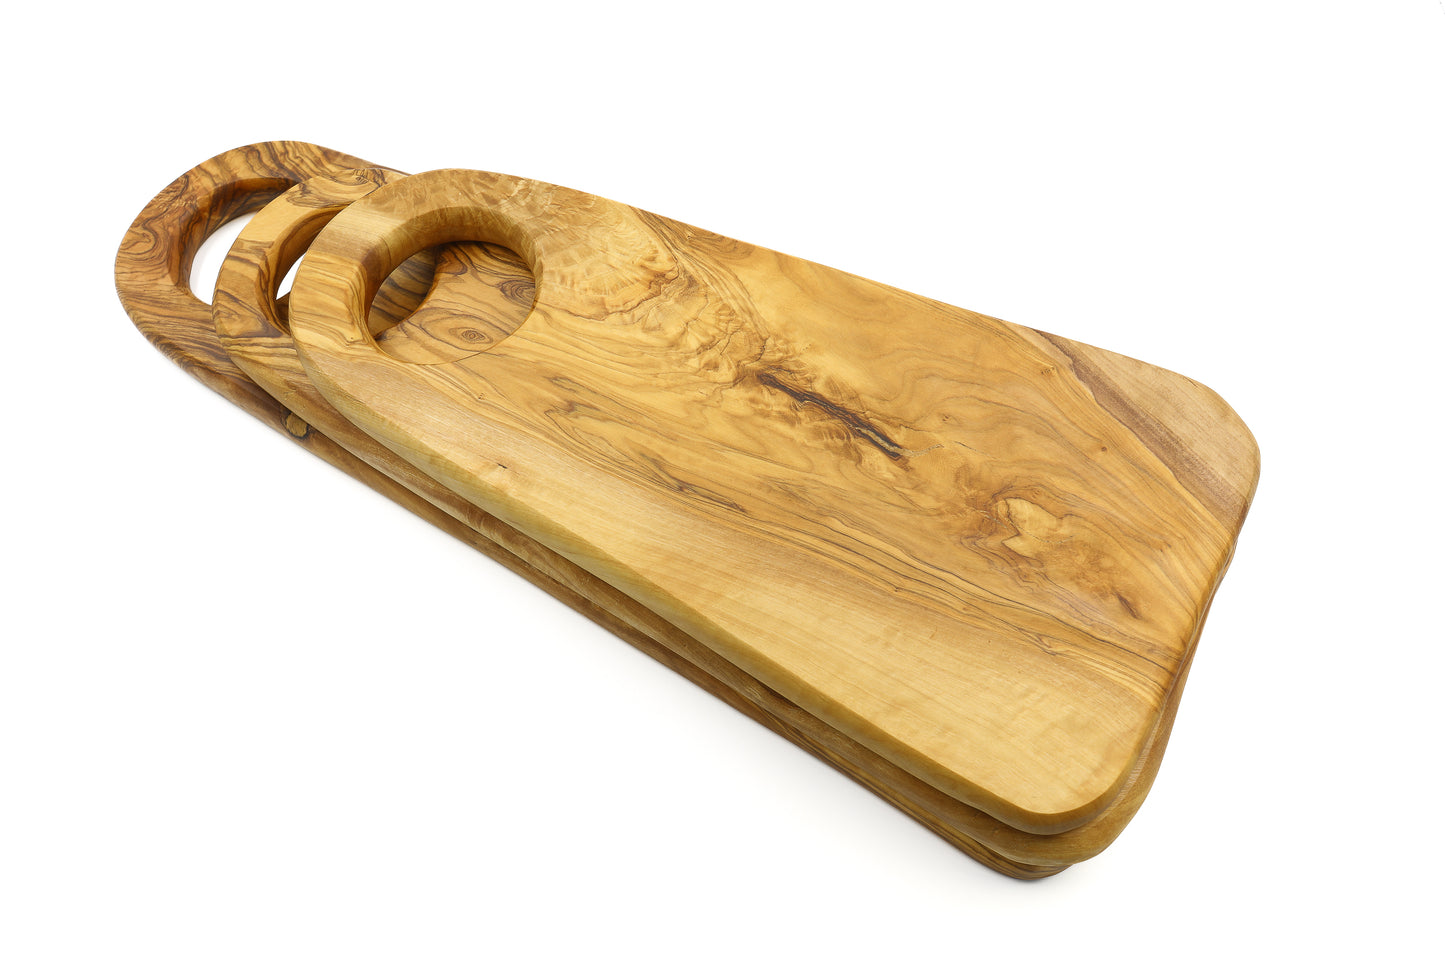 Stylish oval olive wood serving board, decorative display piece